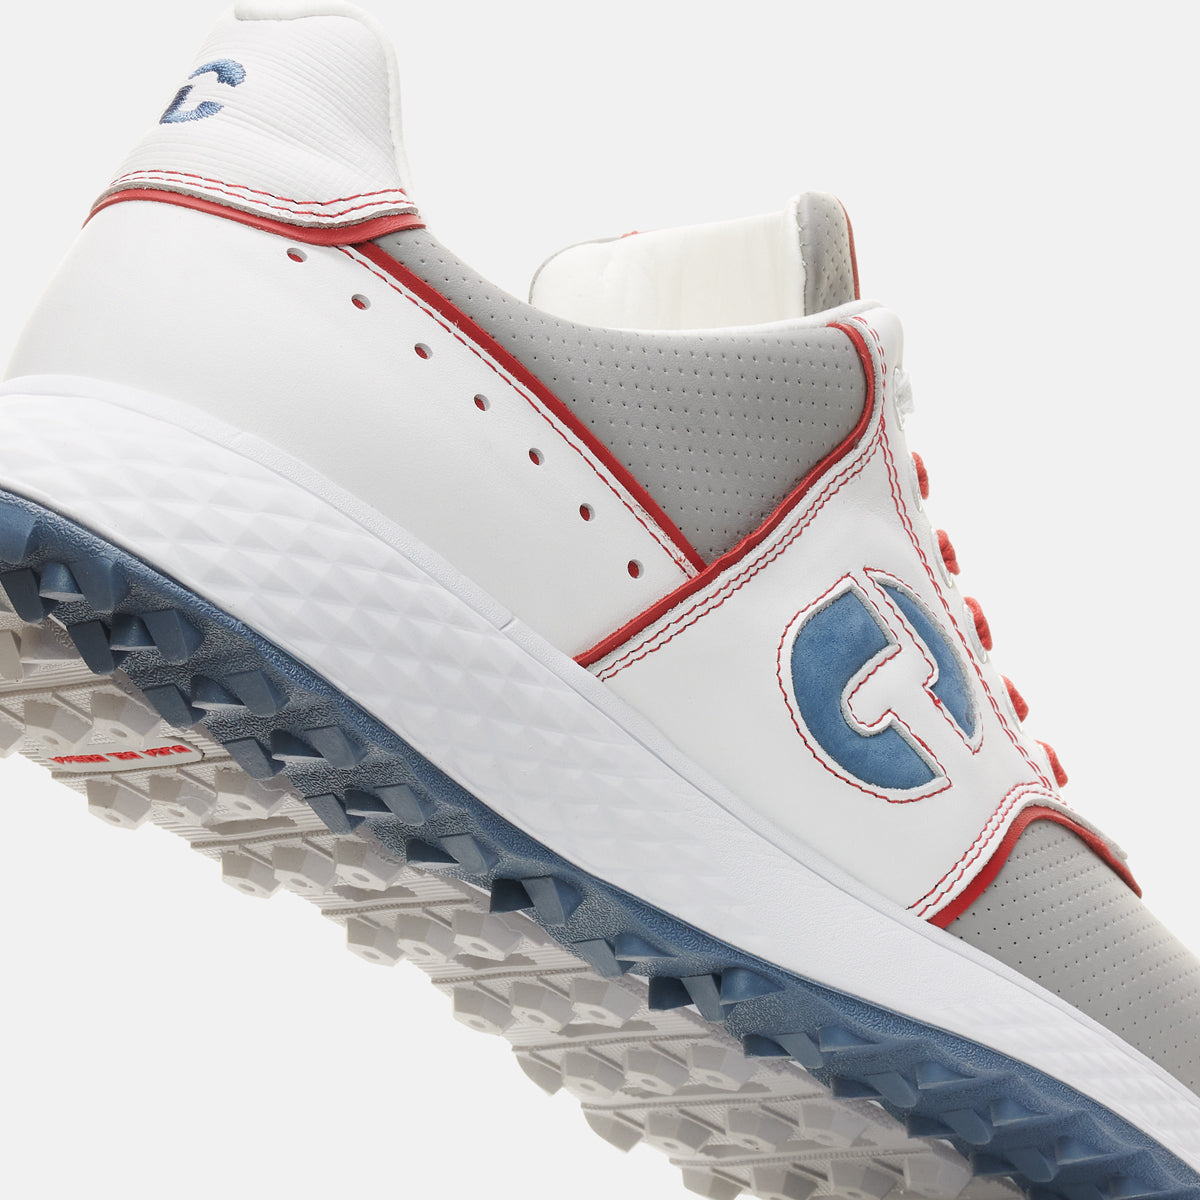 Todays Golfers Editors Choice Spikeless Golf Shoes